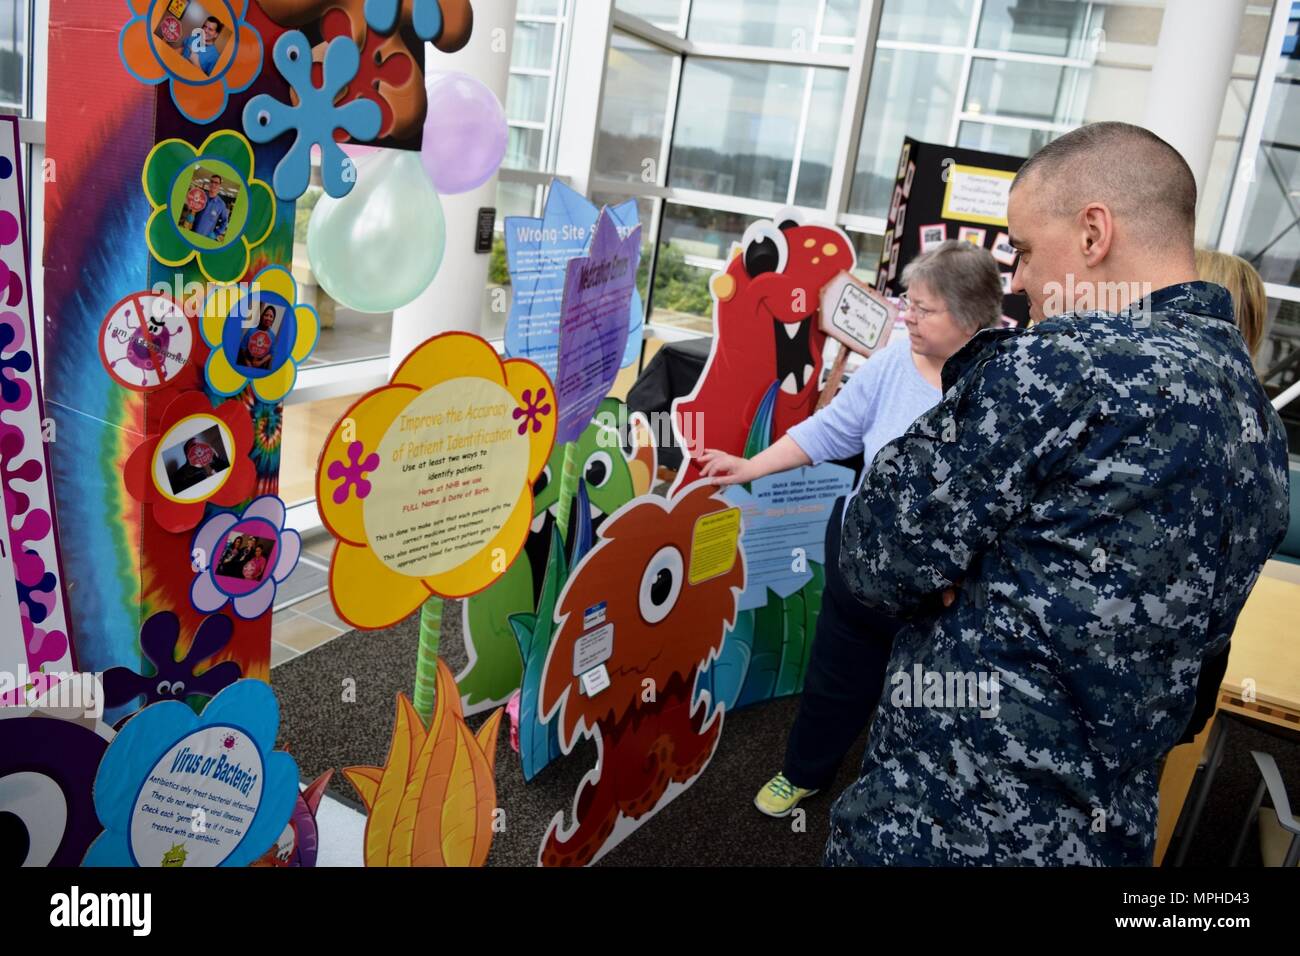 Naval Hospital Bremerton recognizes National Patient Safety Week  by reminding and educating staff, beneficiaries and visitors to 'Weed out  Germs,' with a colorful display specifically designed to catch everyone's  attention so they can in turn prevent infection (Official Navy photo by  Douglas H Stutz, Naval Hospital Bremerton Public Affairs). Stock Photo